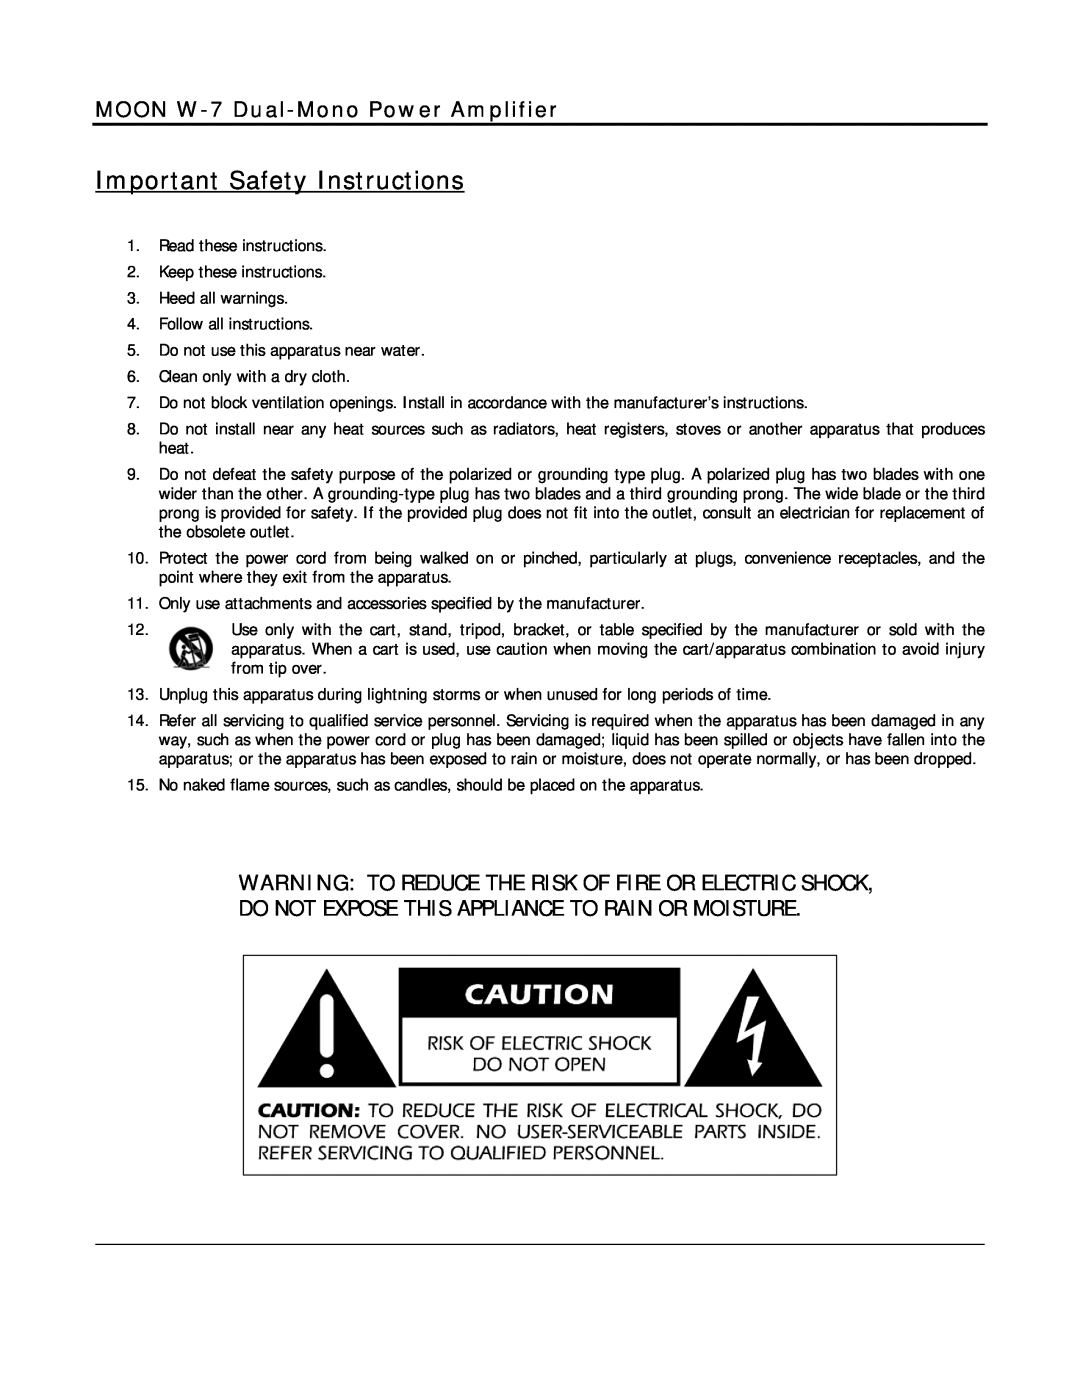 Simaudio owner manual Important Safety Instructions, MOON W-7 Dual-MonoPower Amplifier 